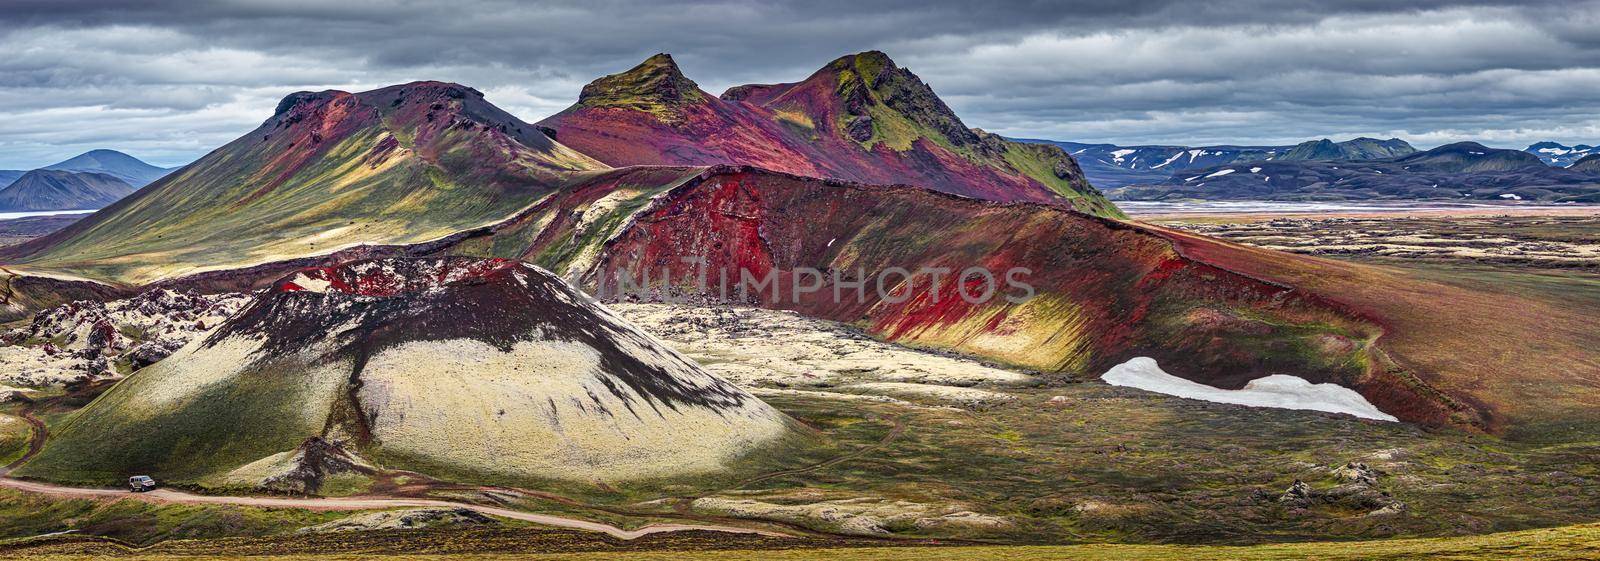 Panoramic surreal magic Icelandic landscape of colorful rainbow volcanic Landmannalaugar mountains, red and pink volcanic crater Stutur at famous Laugavegur hiking trail with dramatic sky and a big 4WD car on the road, Iceland